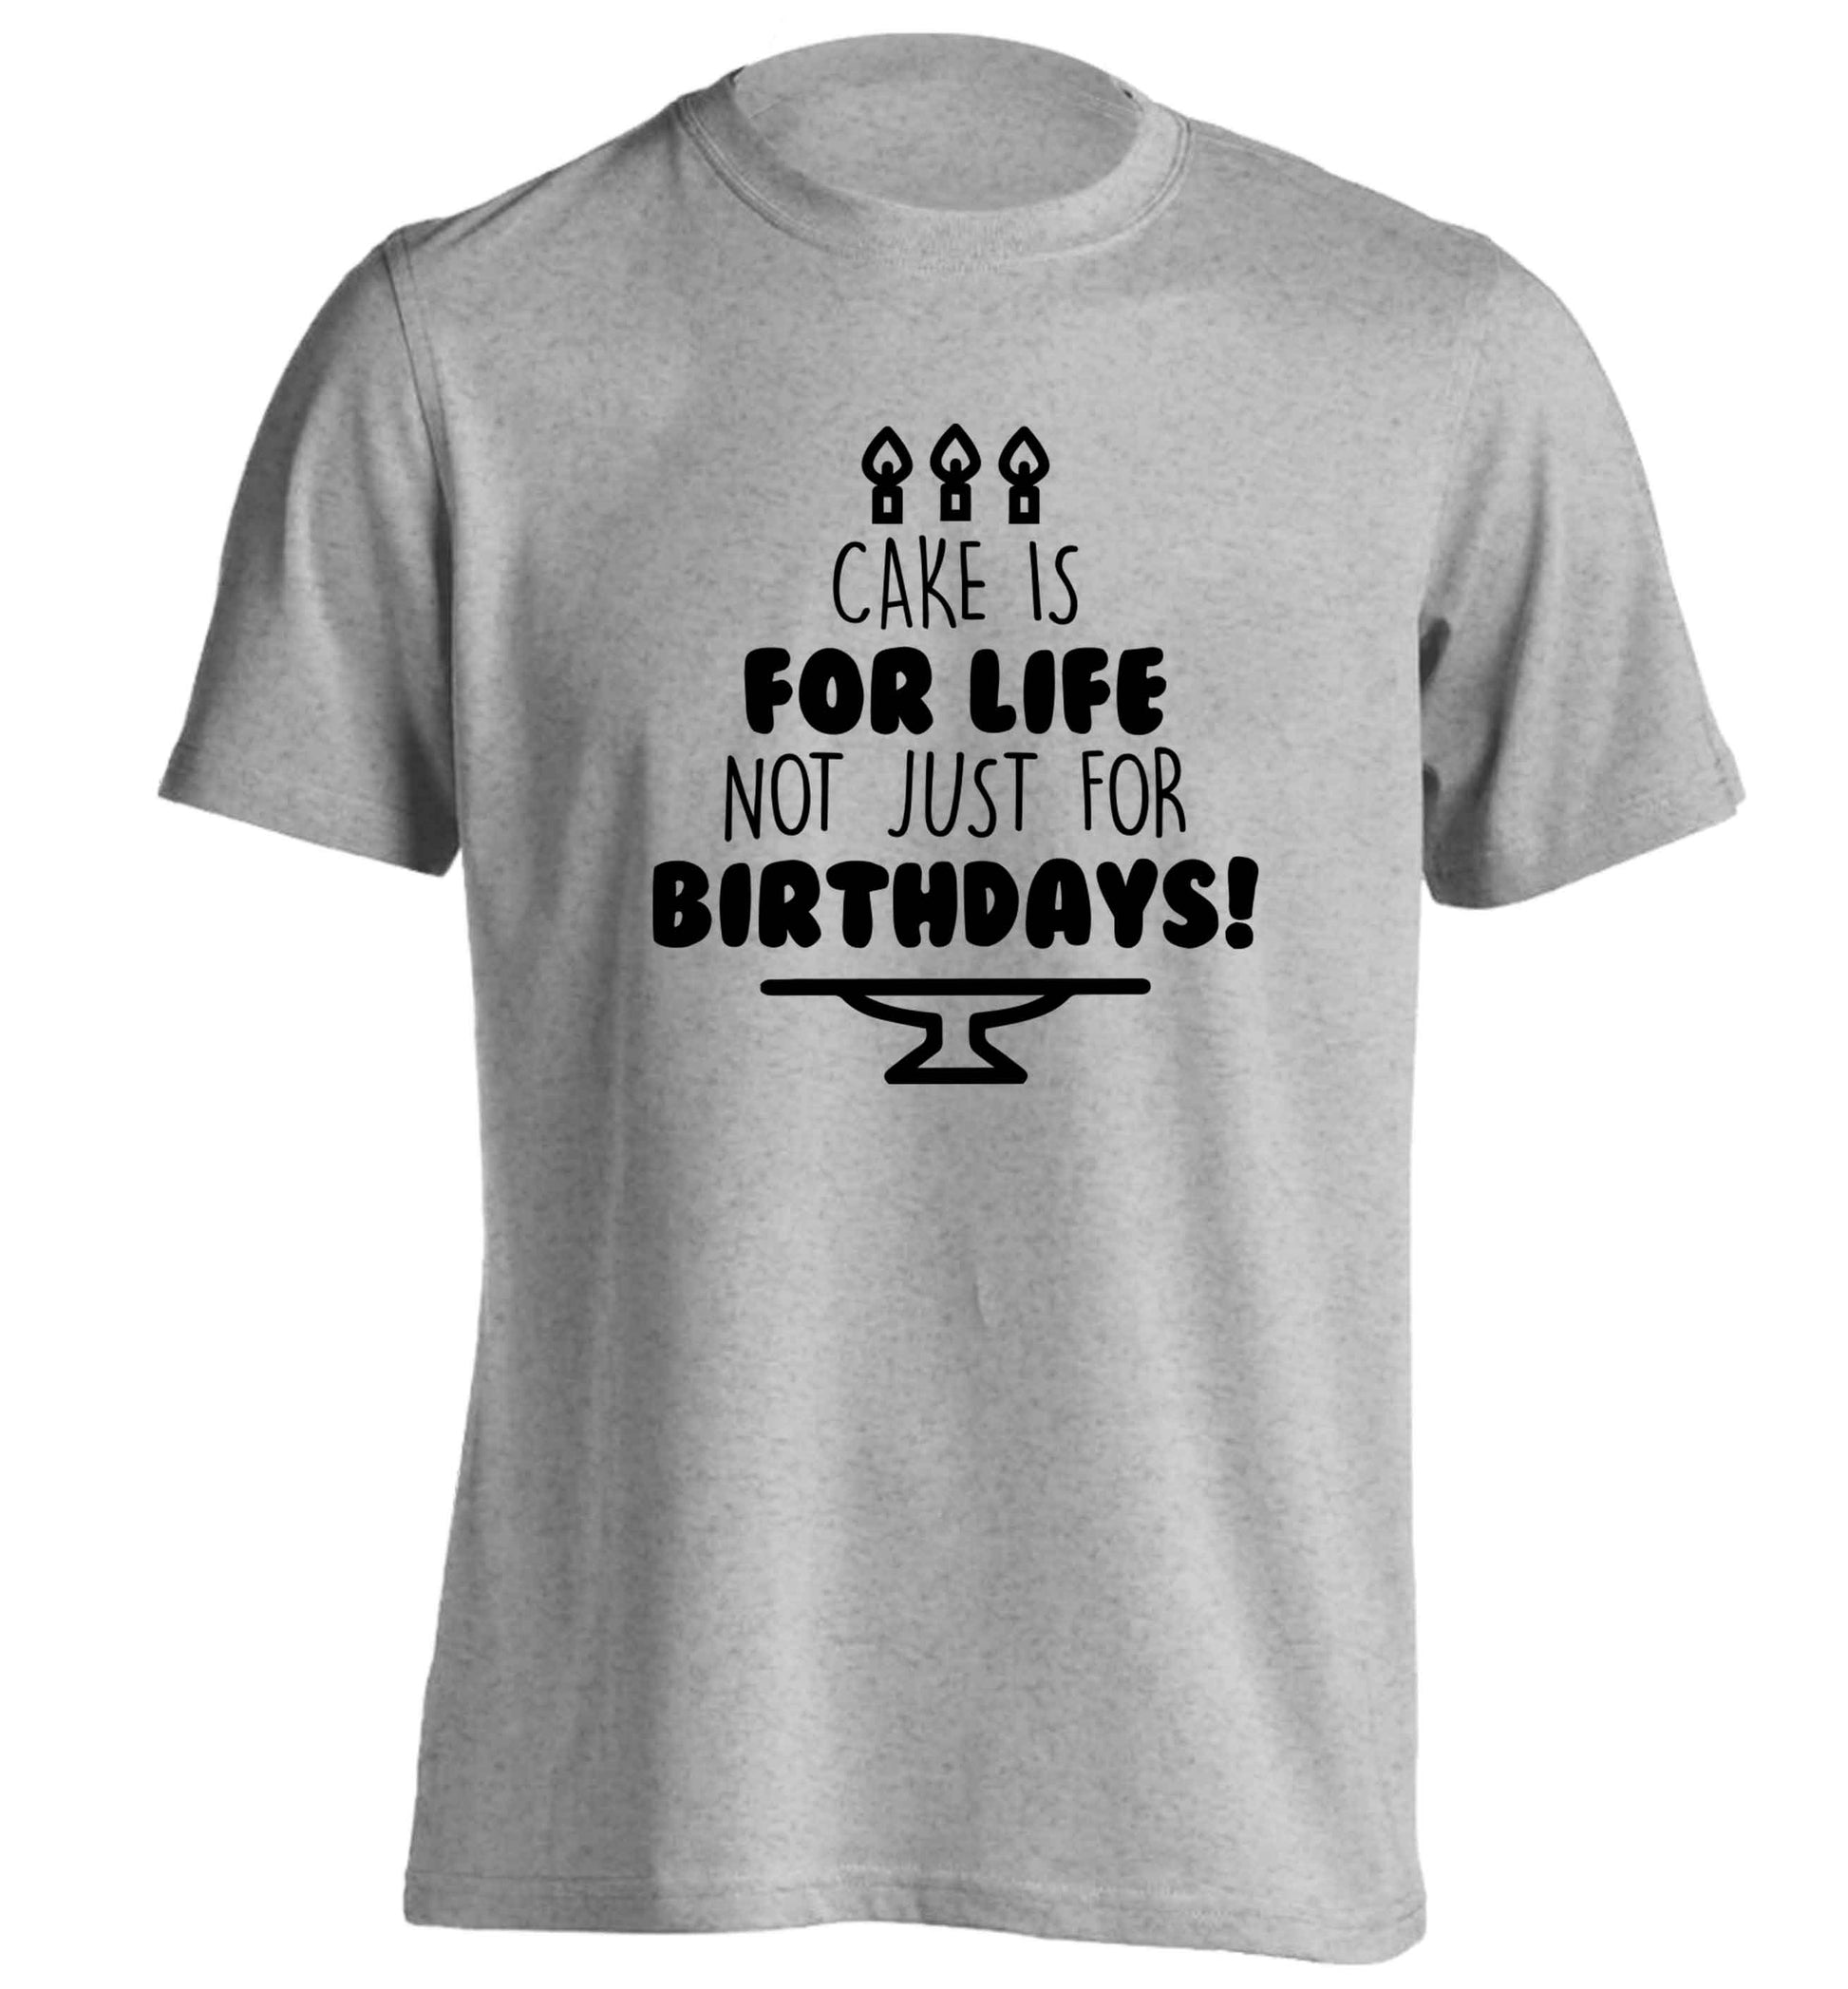 Cake is for life not just for birthdays adults unisex grey Tshirt 2XL